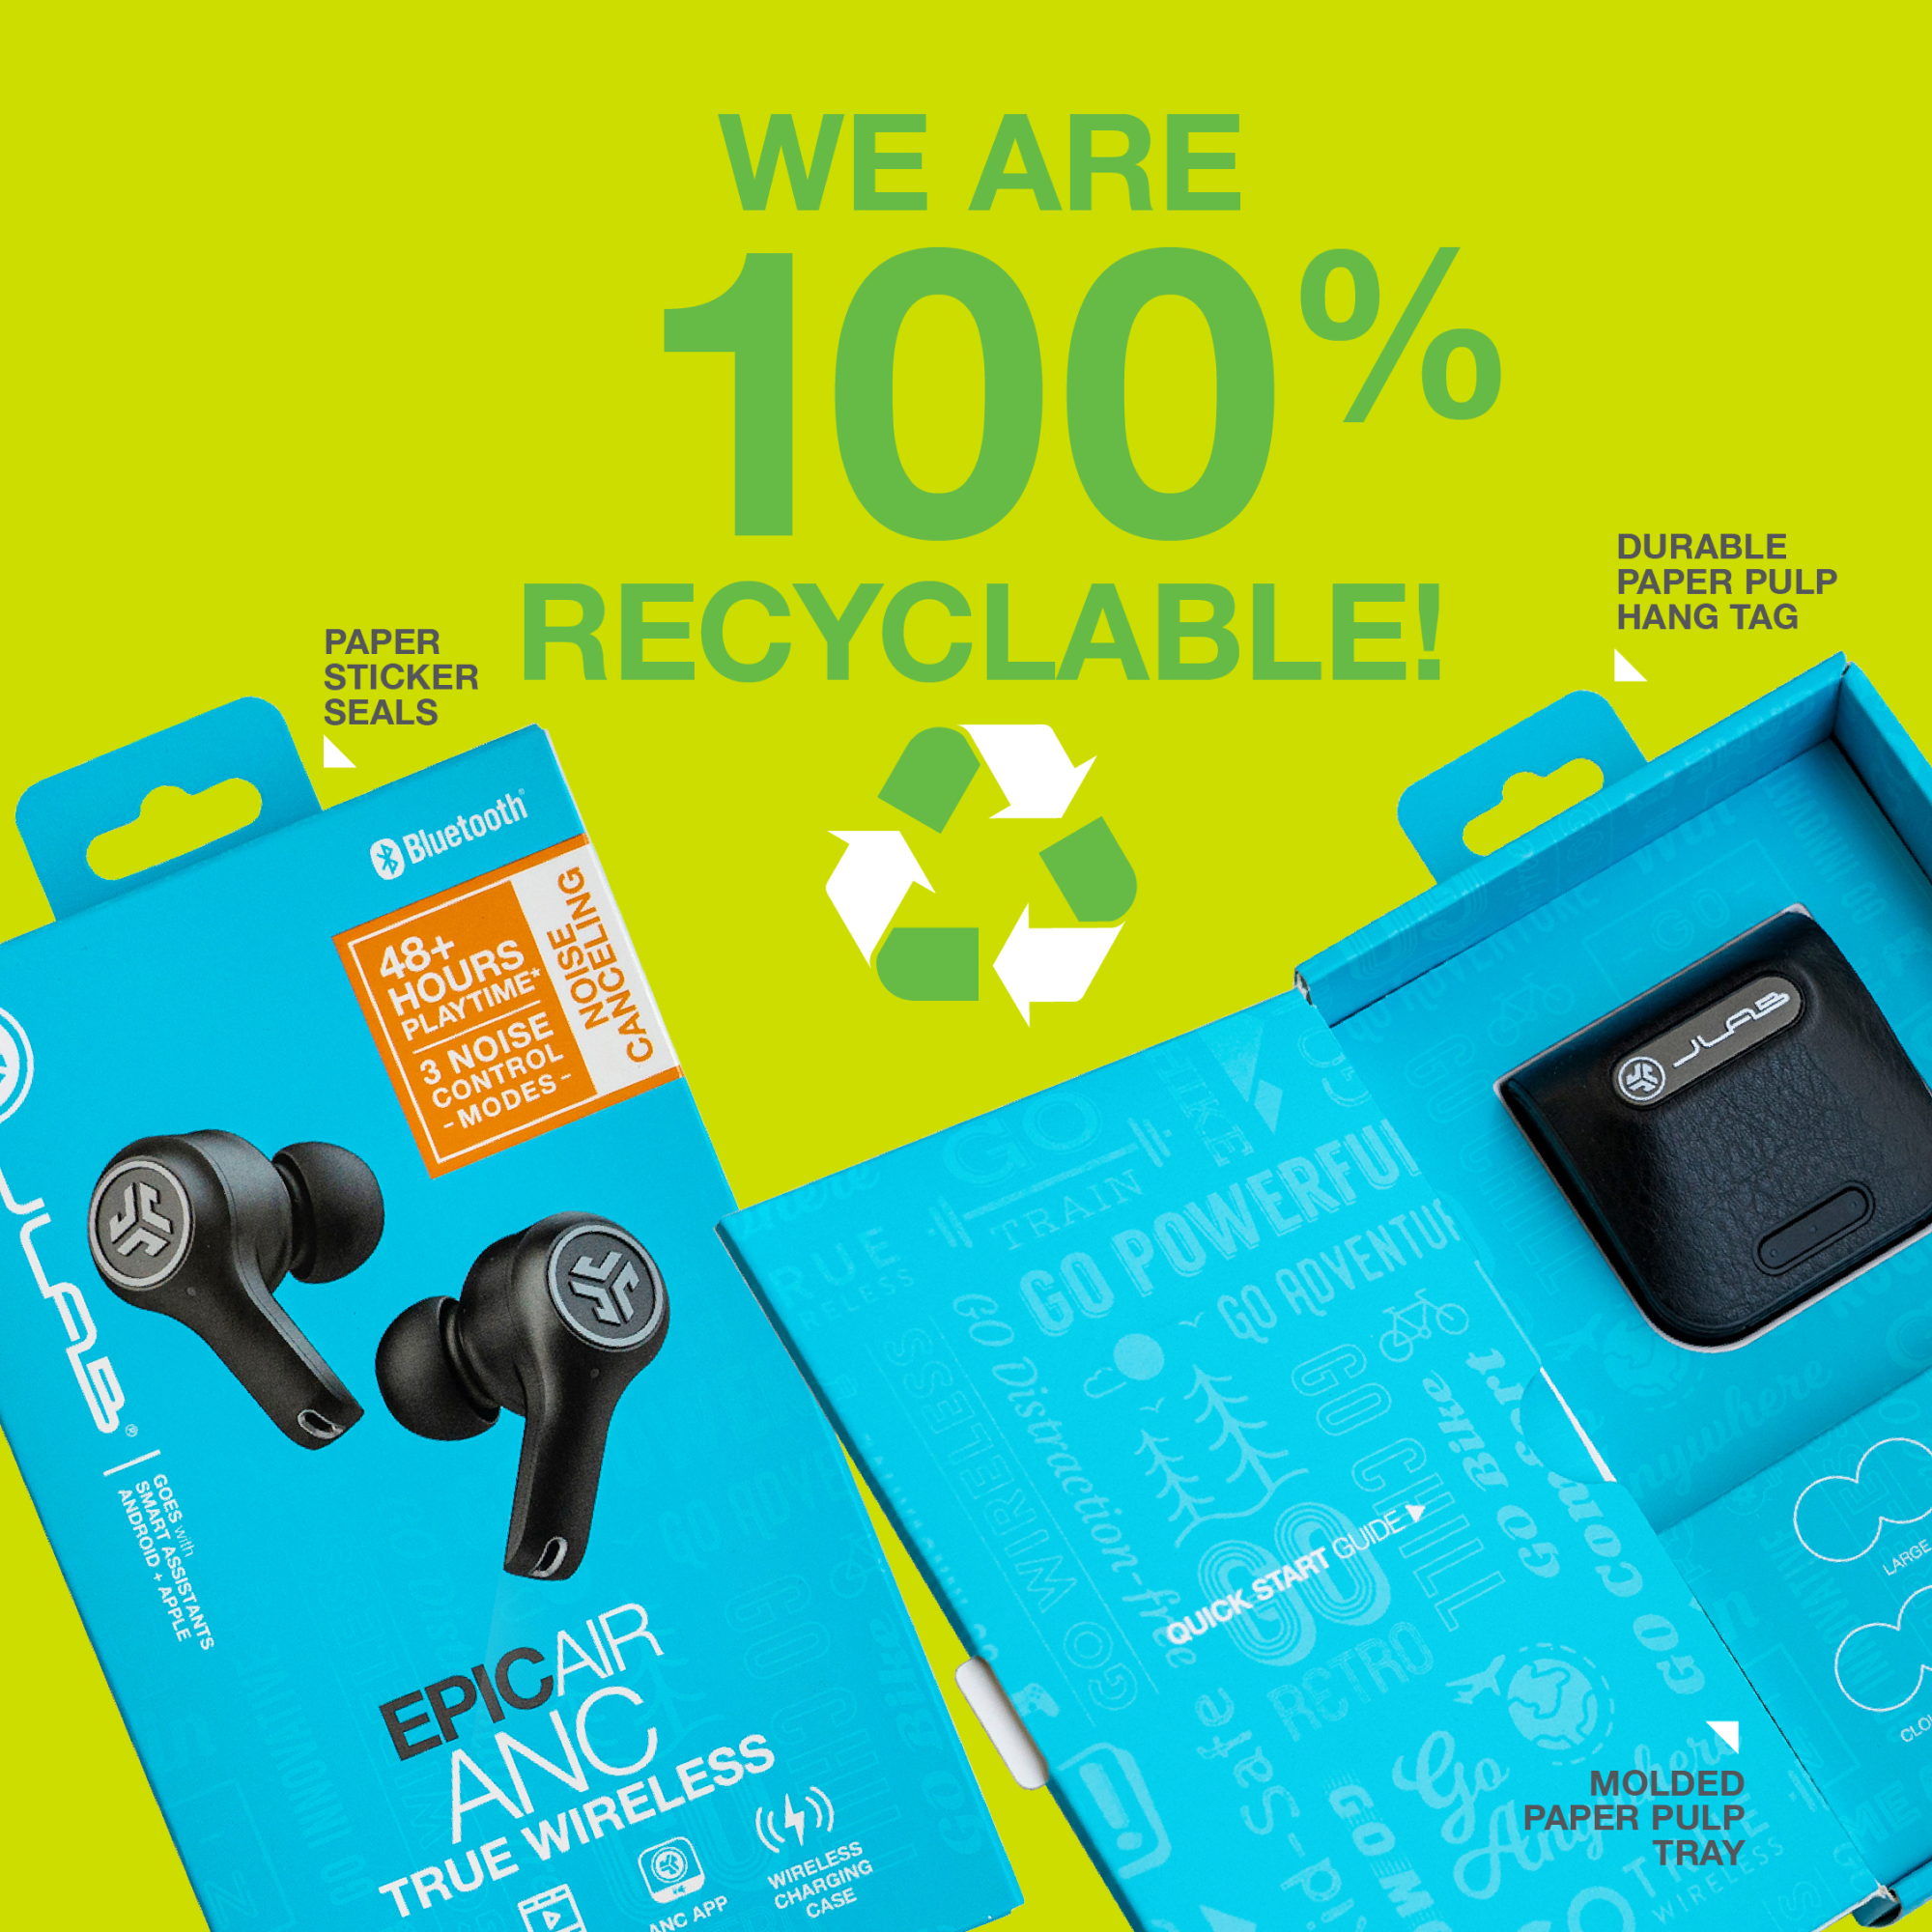 We are 100% recyclable!